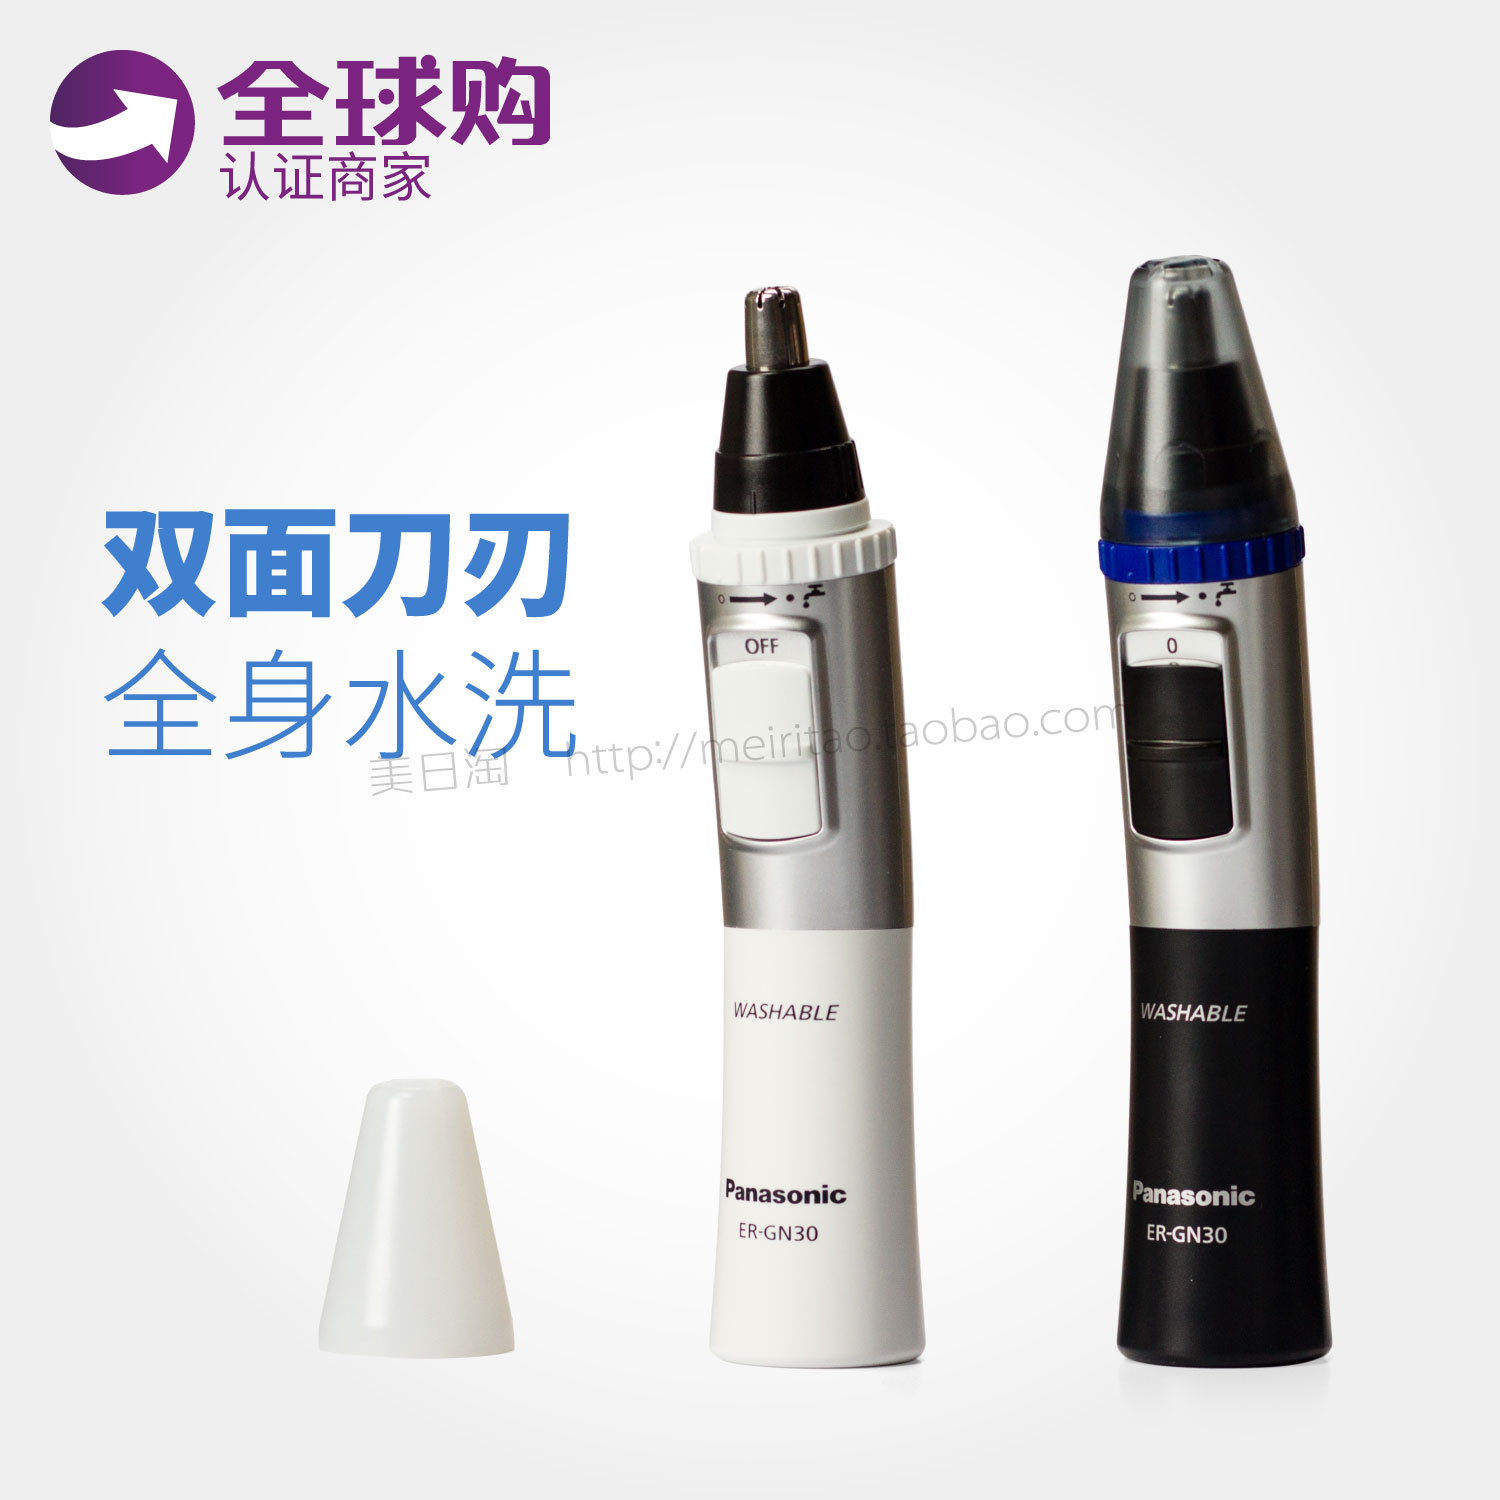 USD 52.87] Japan imported Panasonic Electric nose hair trimmer ER ...